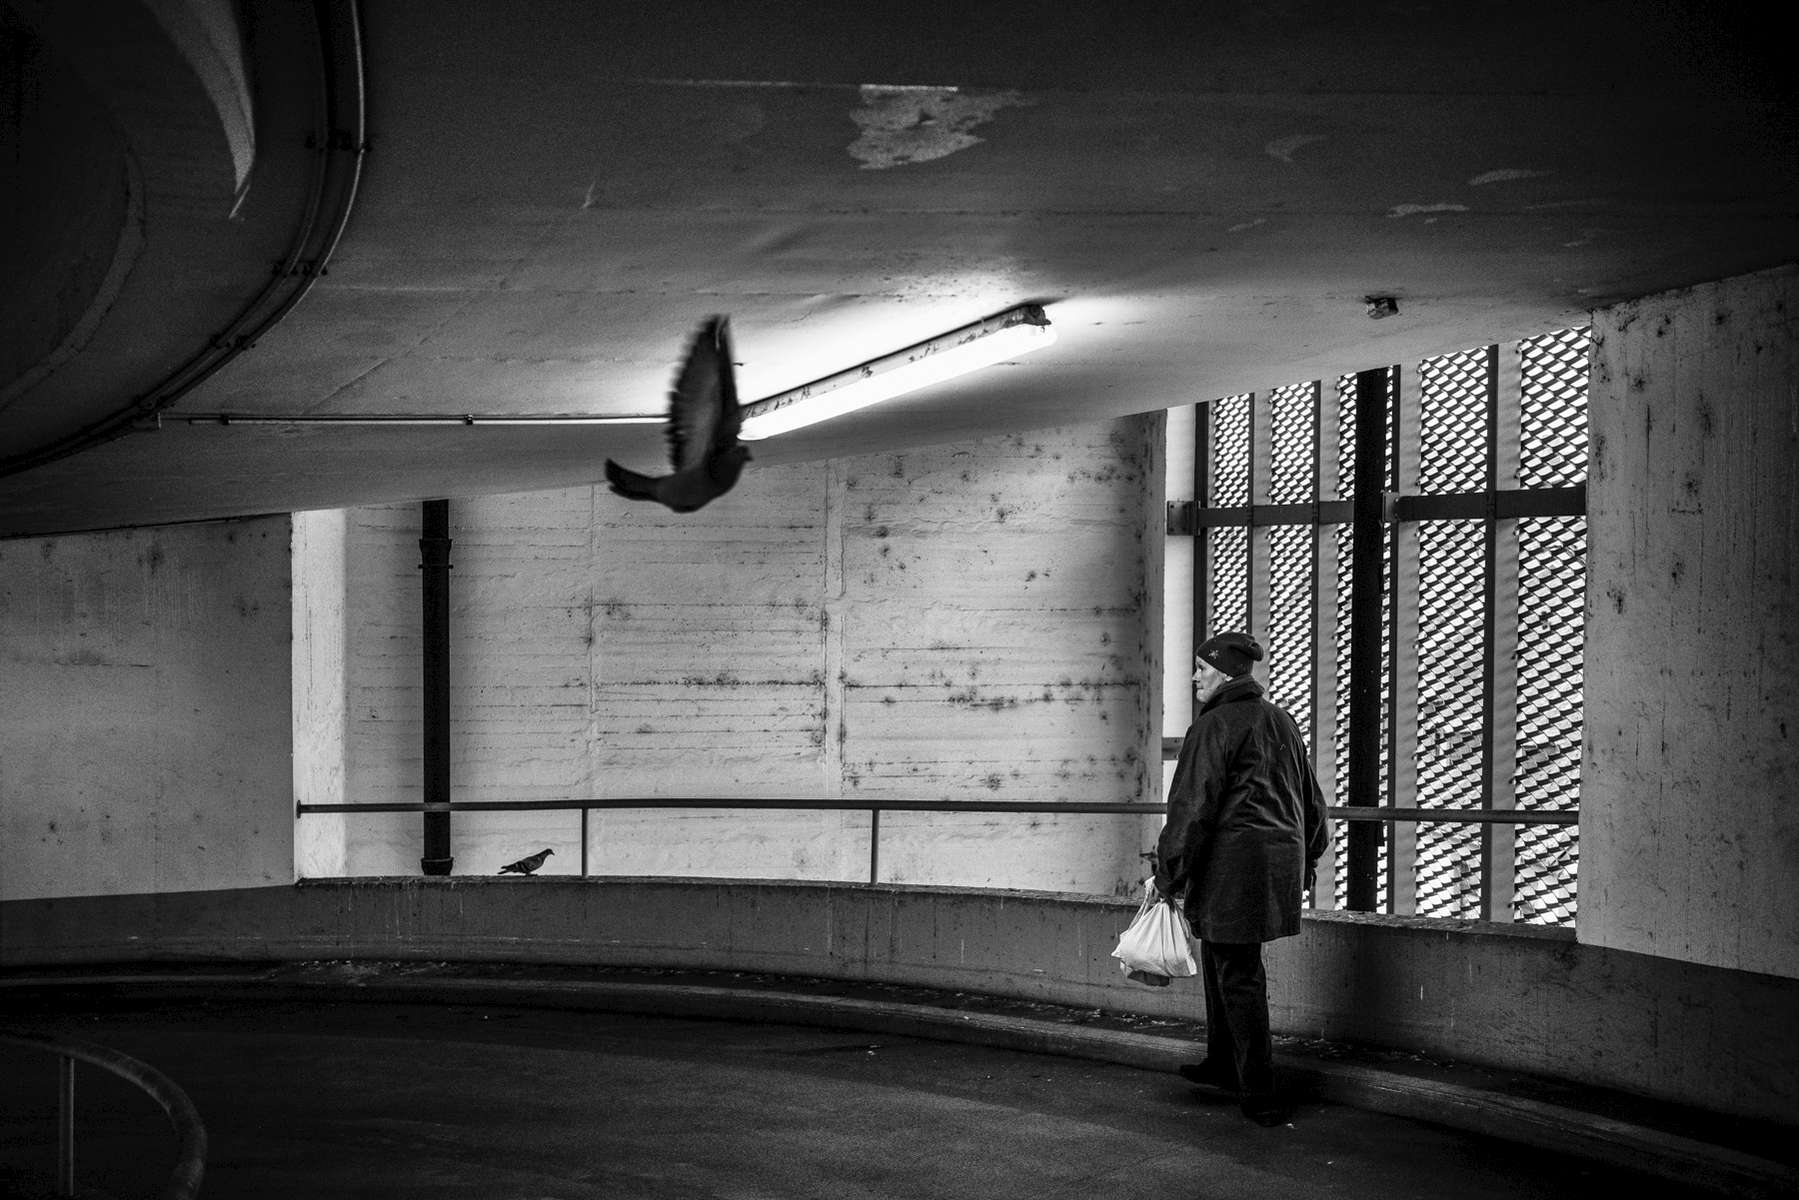 Gudrun Stürmer, head of the pigeon shelter project 'Stadttaubenprojekt' in Frankfurt, is walking through a parking garage in downtown Frankfurt on the afternoon of New Years Eve 2017 to collect injured and sick pigeons to protect them from the fireworks.